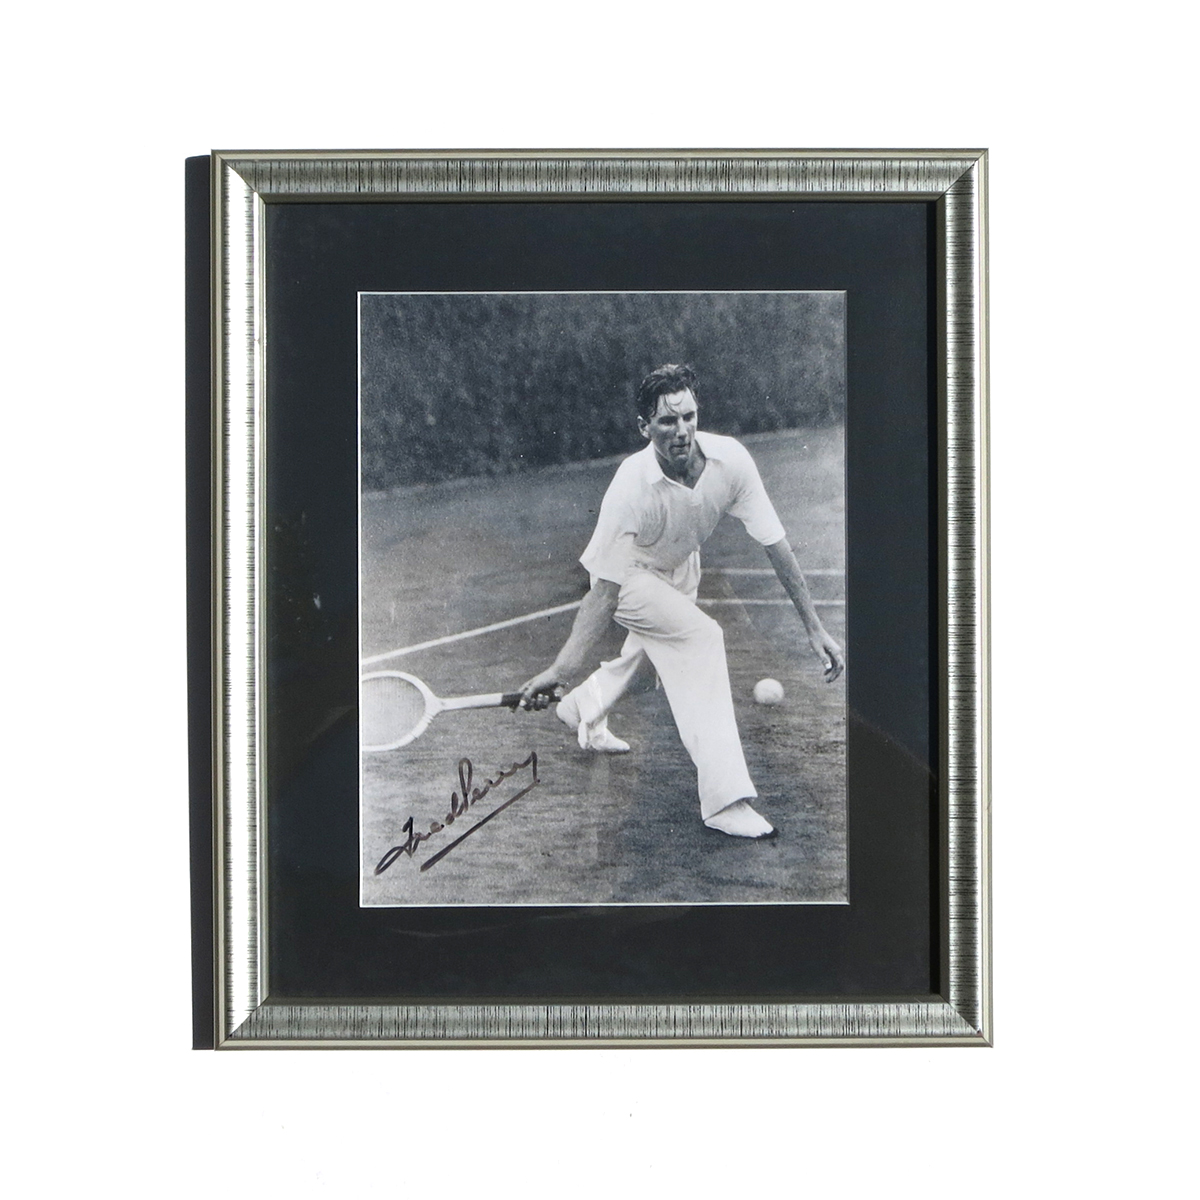 Signed Photograph of Fred Perry (c. 1930s)